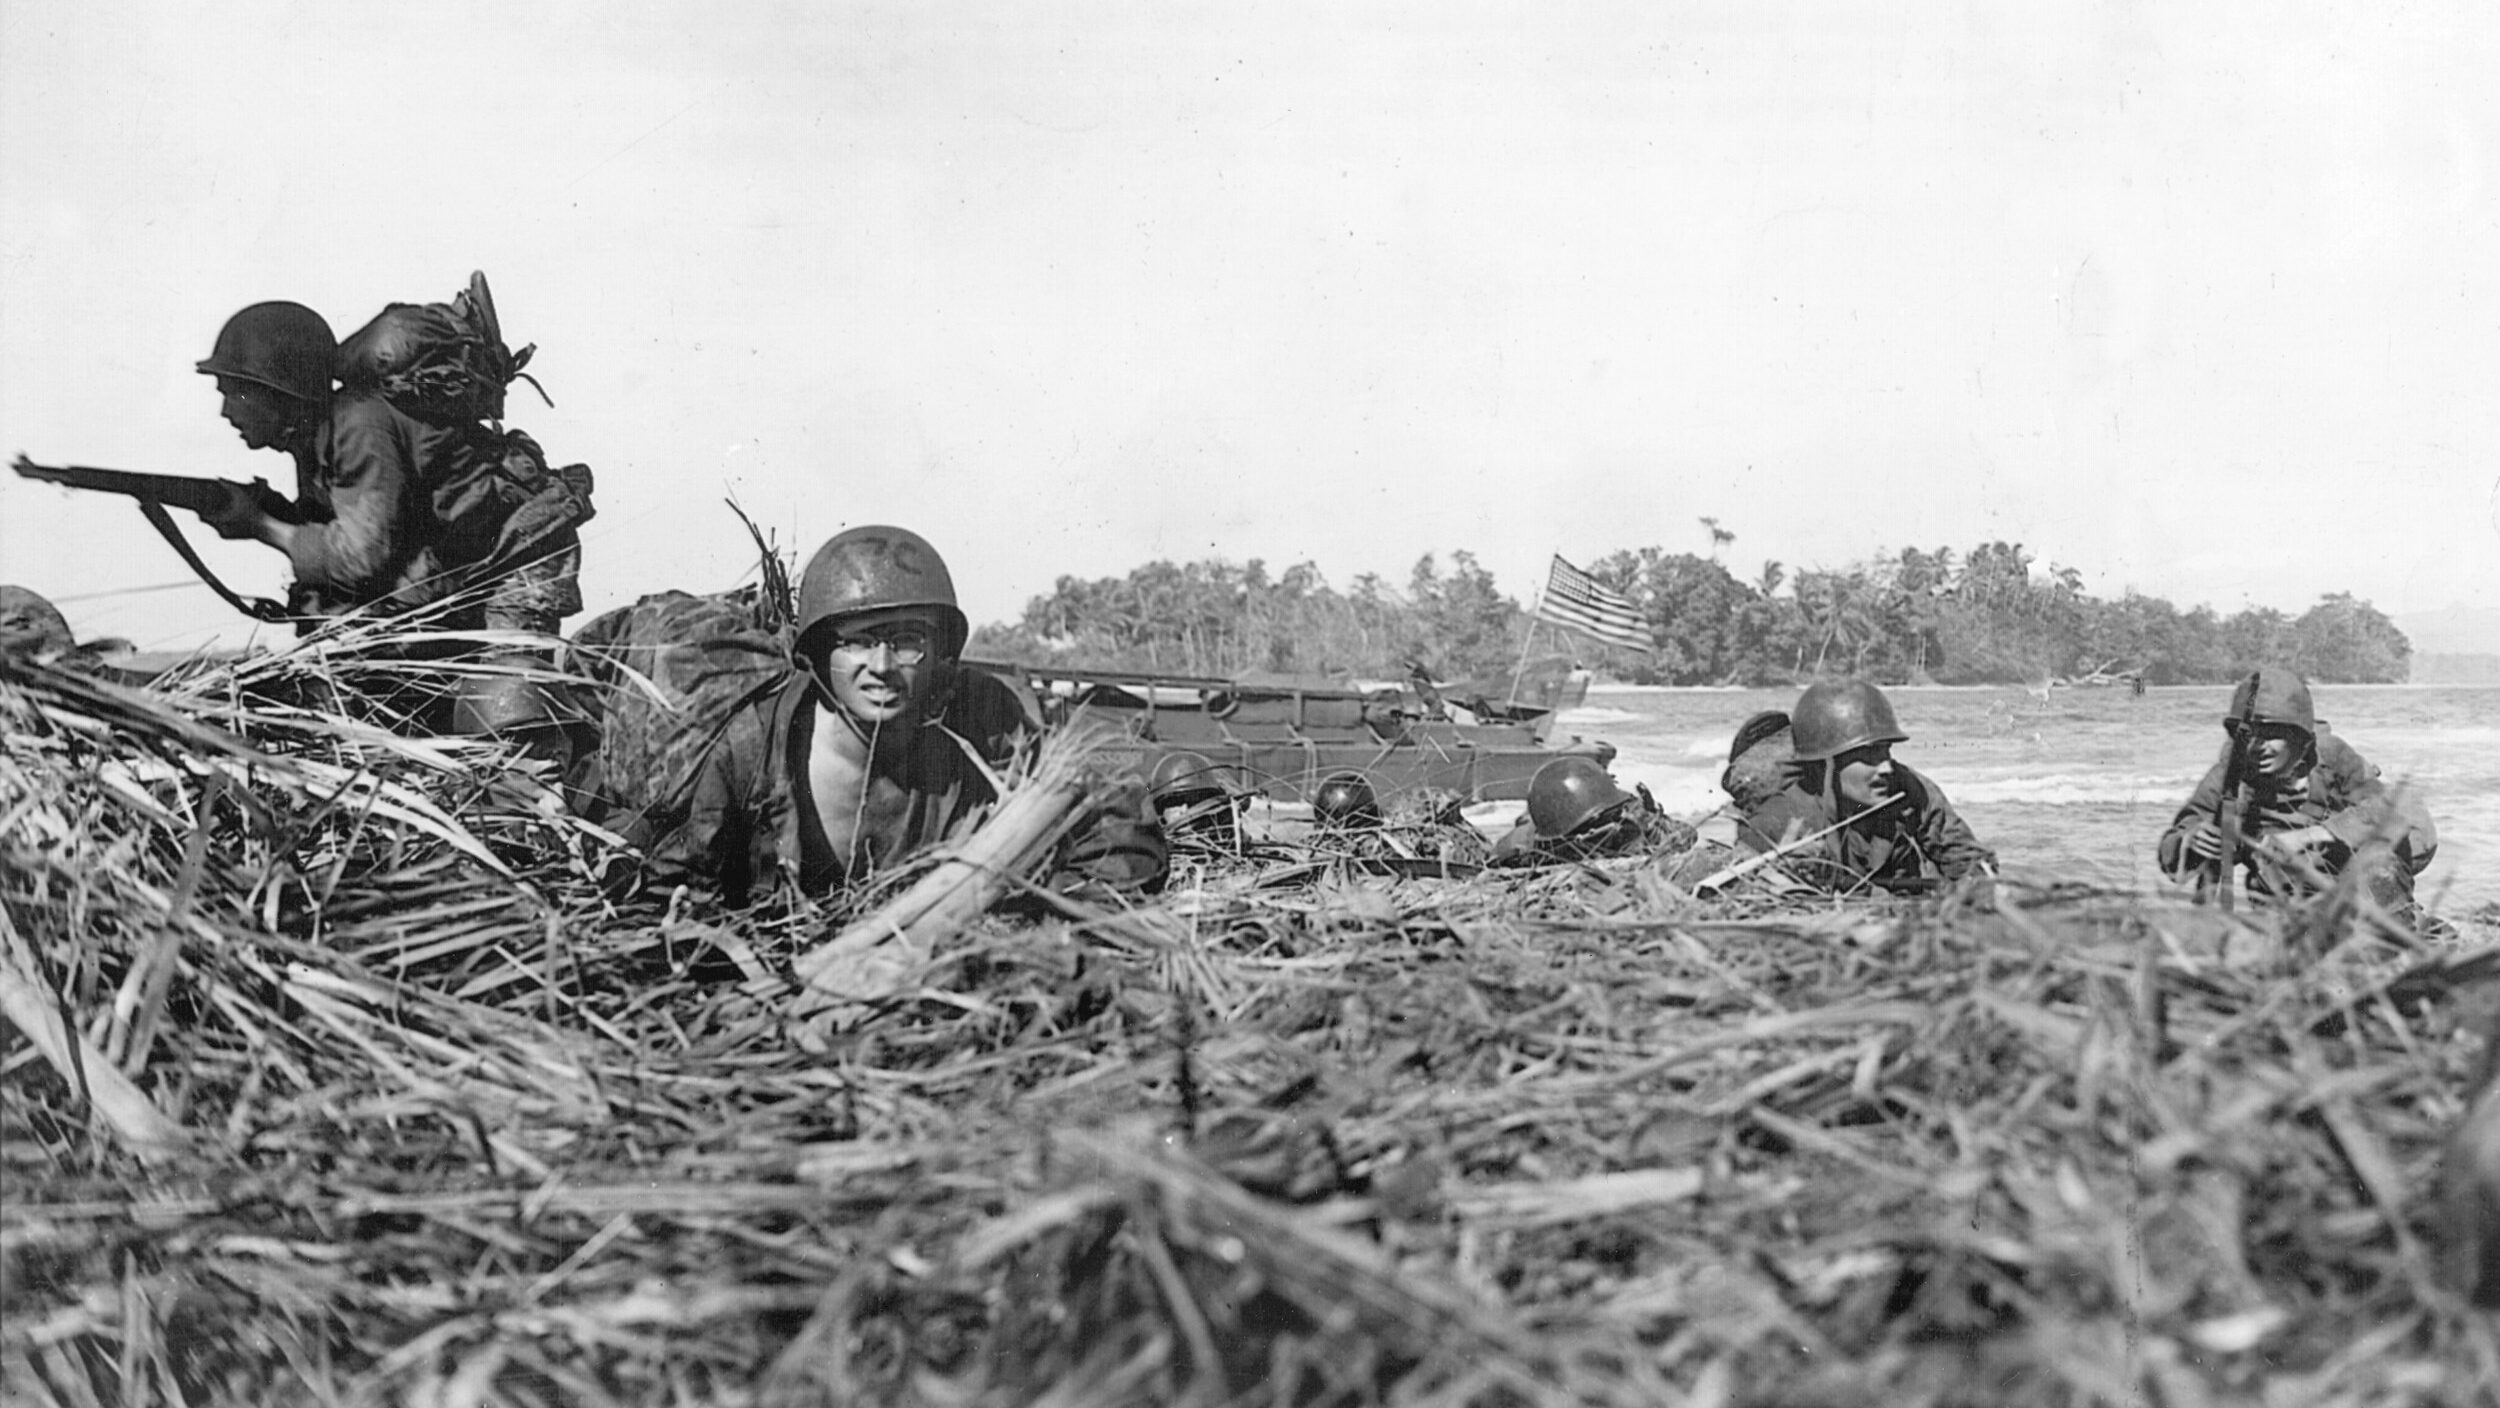 Under heavy Japanese fire, American soldiers seek safety behind a jumble of fallen trees and brush on the island of Wakde, May 17, 1944.